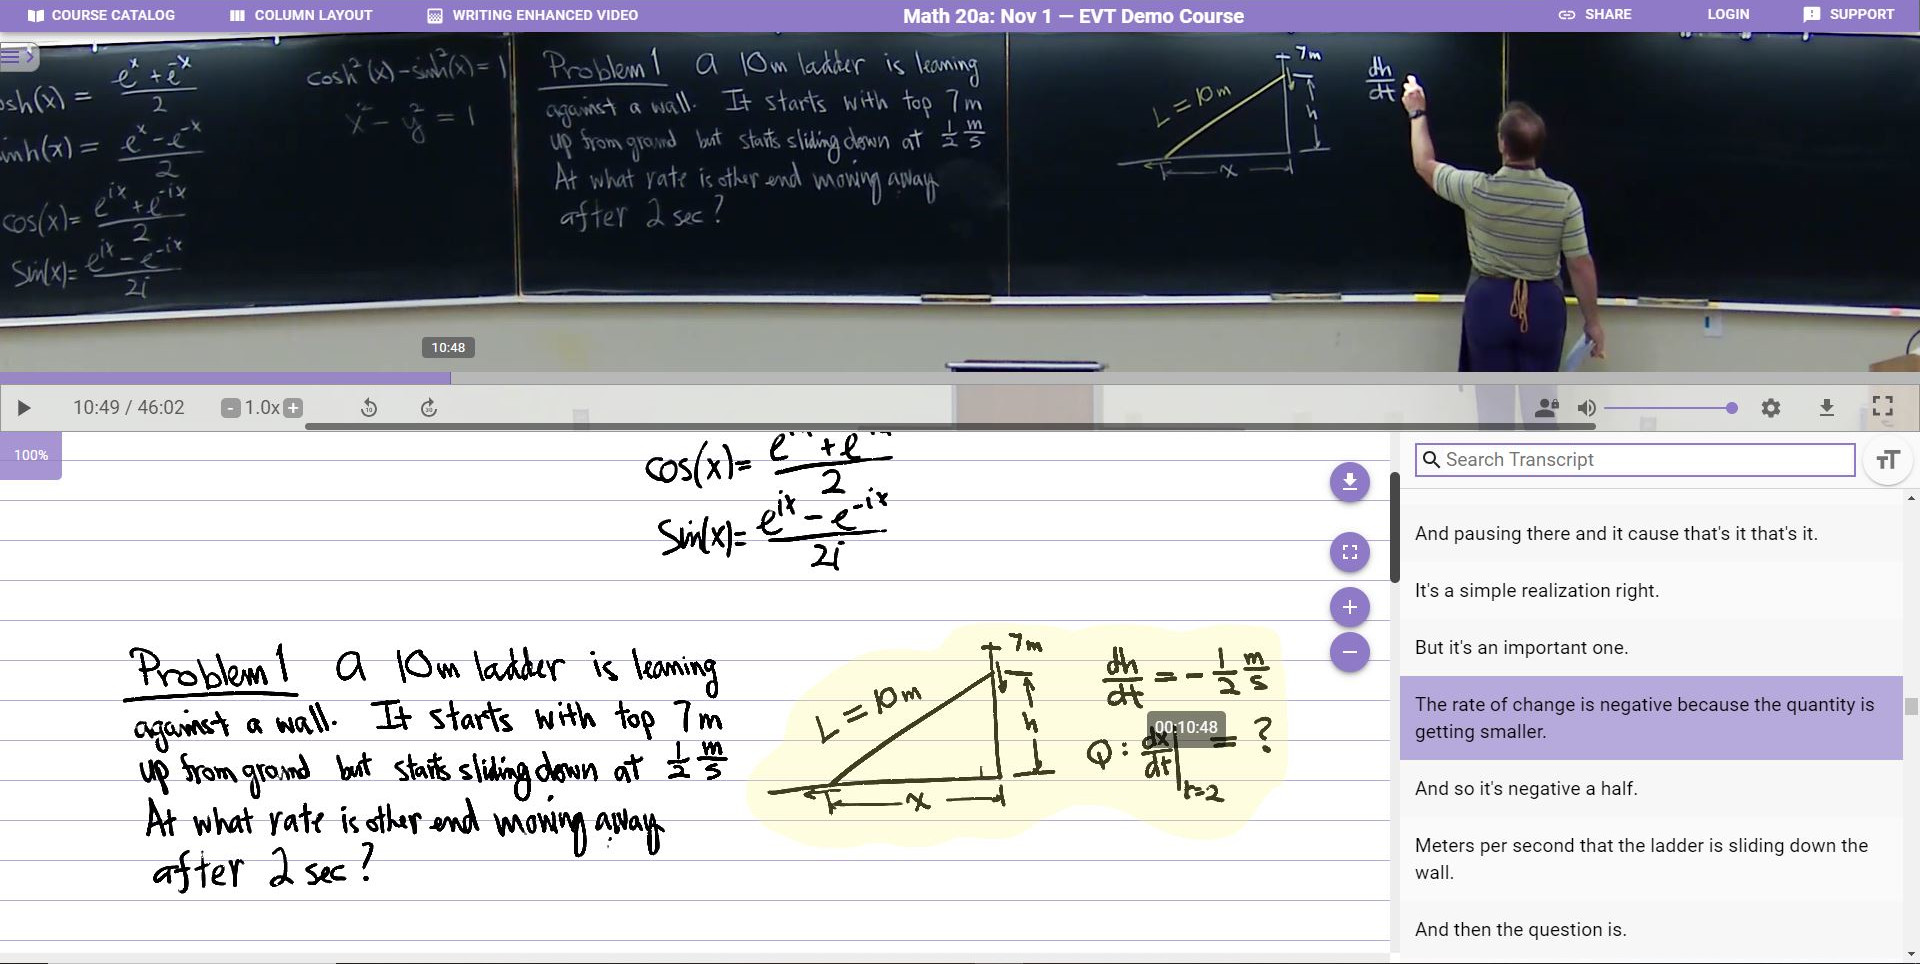 screenshot of the evt web platform, showing a calculus class taught on a chalkboard.